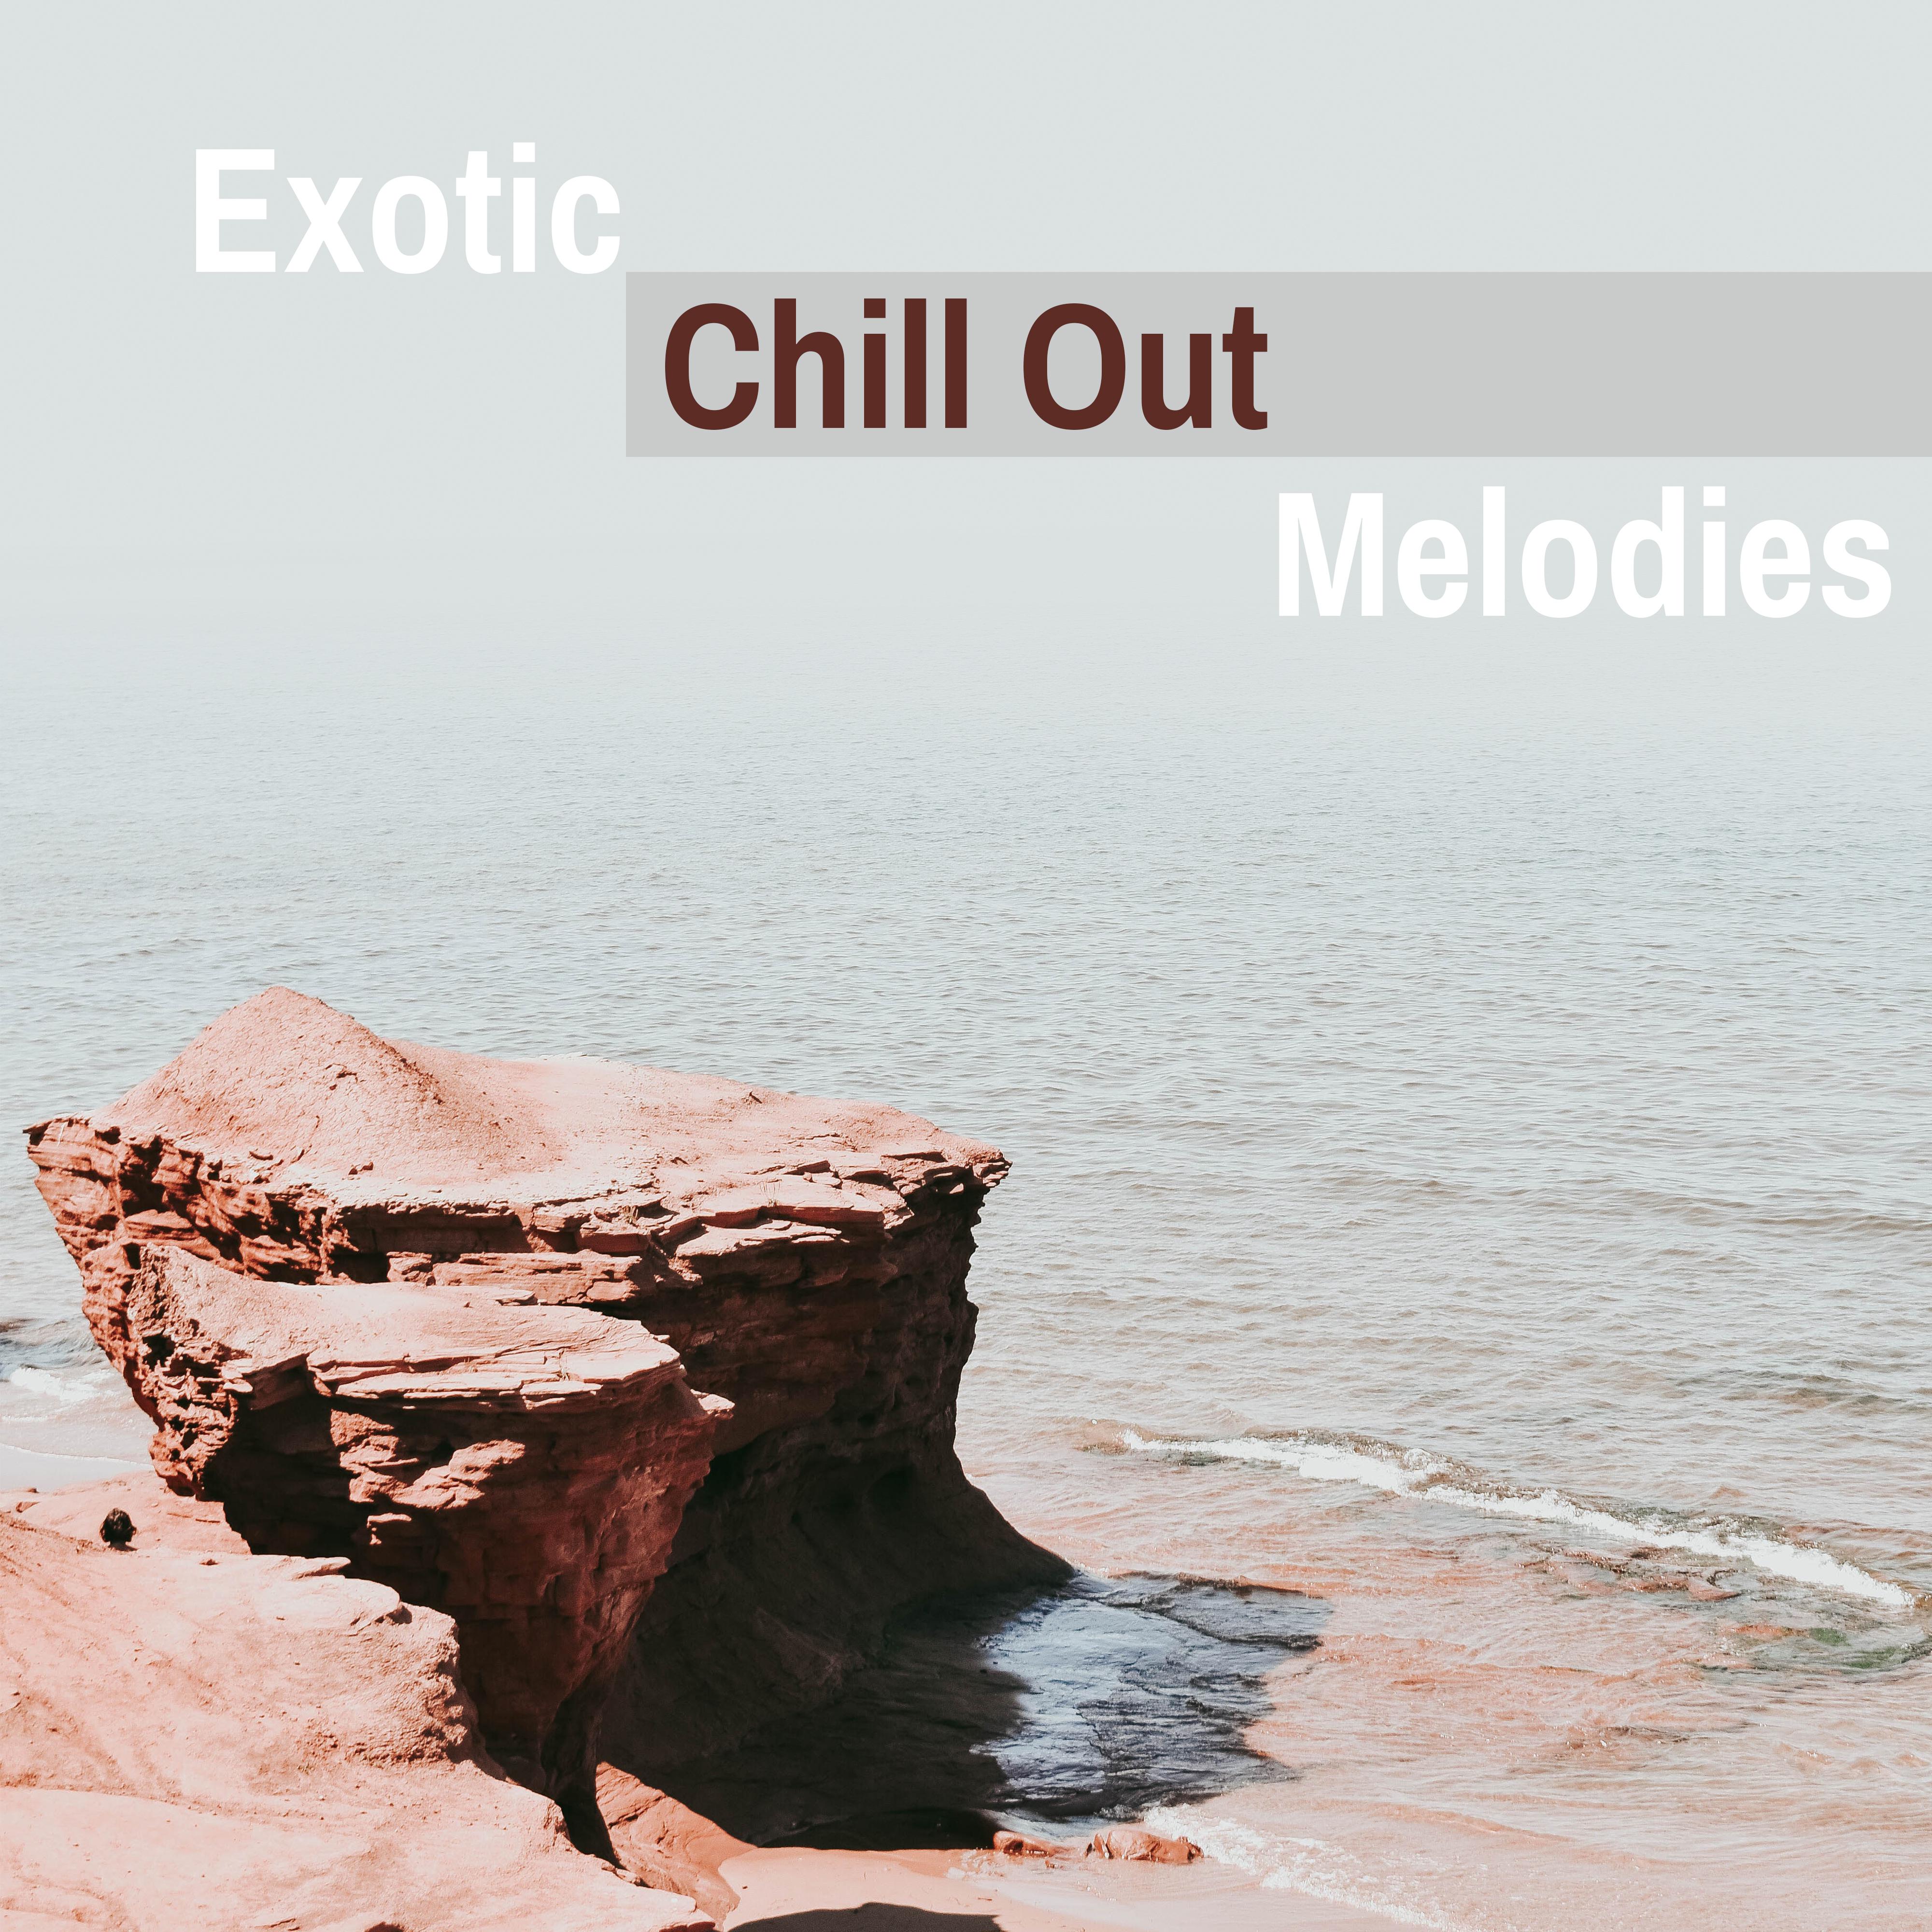 Exotic Chill Out Melodies – Tropical Chill Out Beats, Summer Vibes, Relaxing Melodies, Beach Lounge